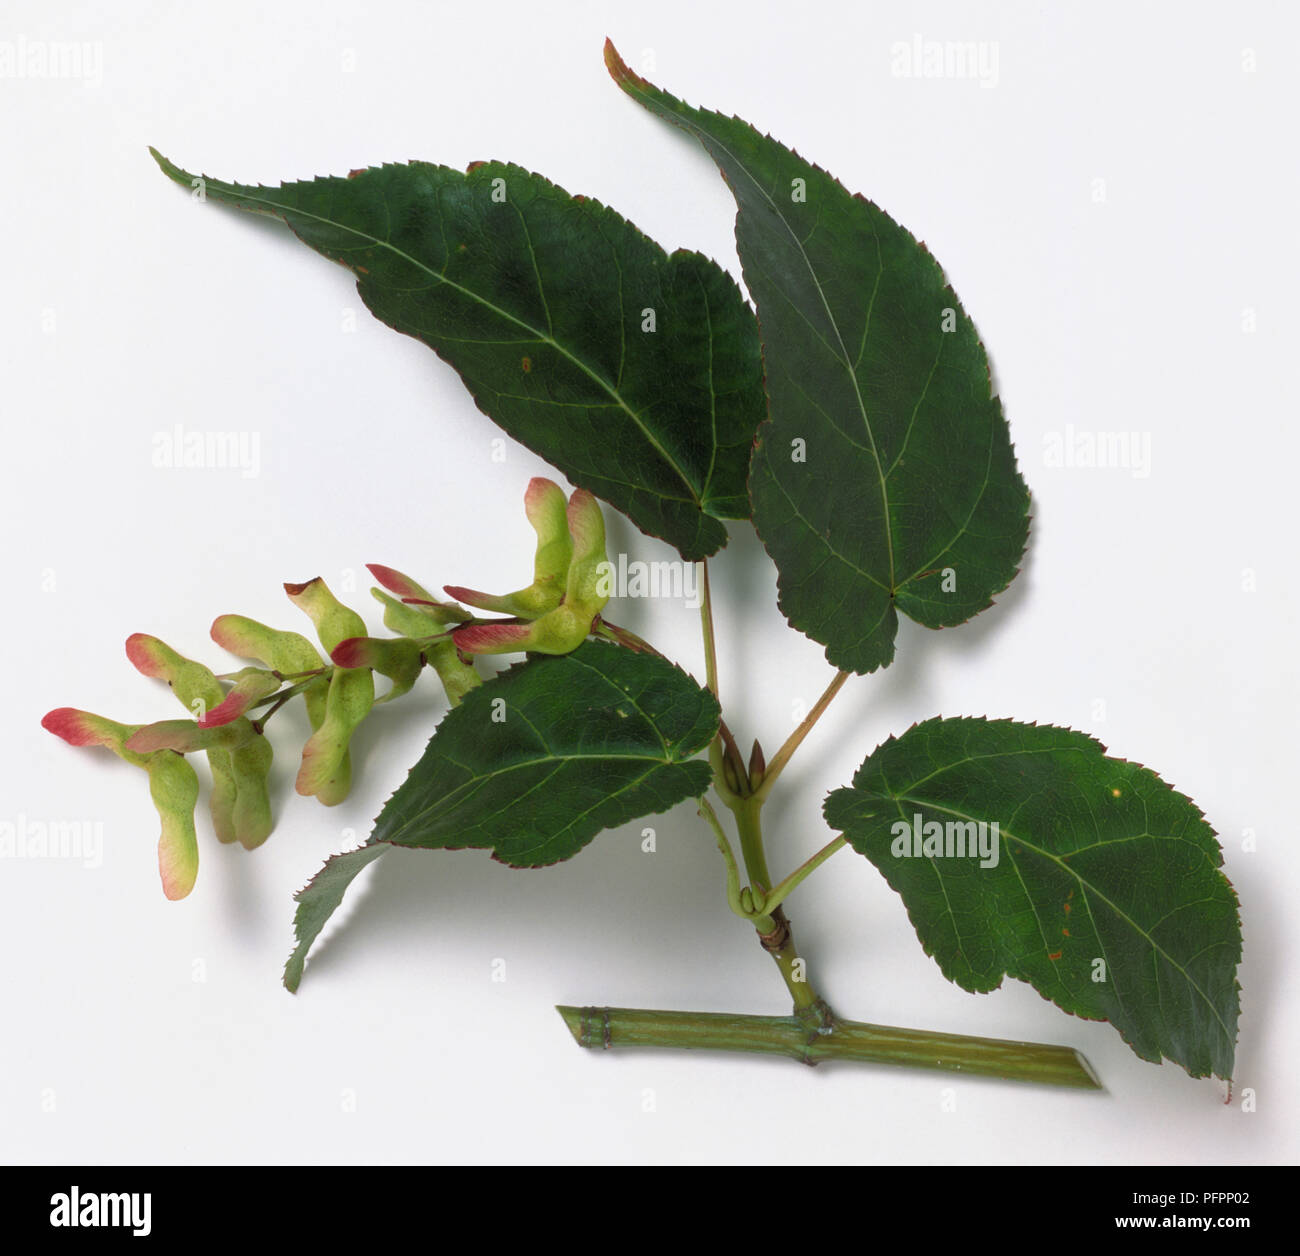 Aceraceae, Acer crataegifolium, Hawthorn Maple, branch section bearing dark green three-toothed lobed leaves, and light green winged fruits with red tips. Stock Photo